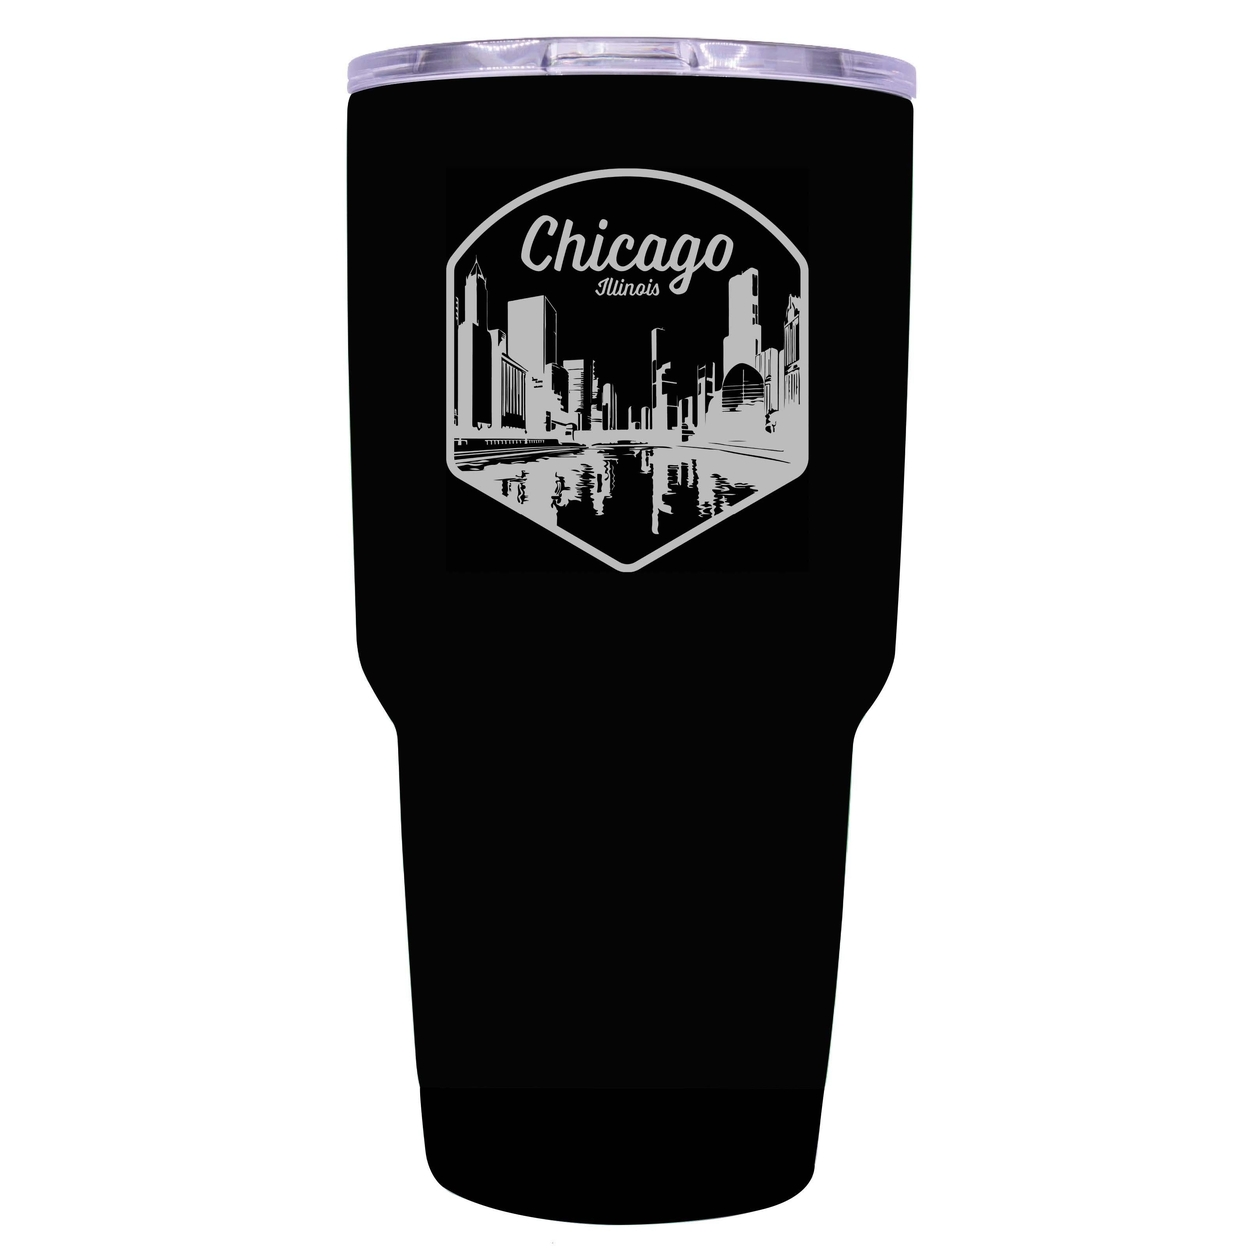 Chicago Illinois Souvenir 24 Oz Engraved Insulated Tumbler - Coral,,2-Pack